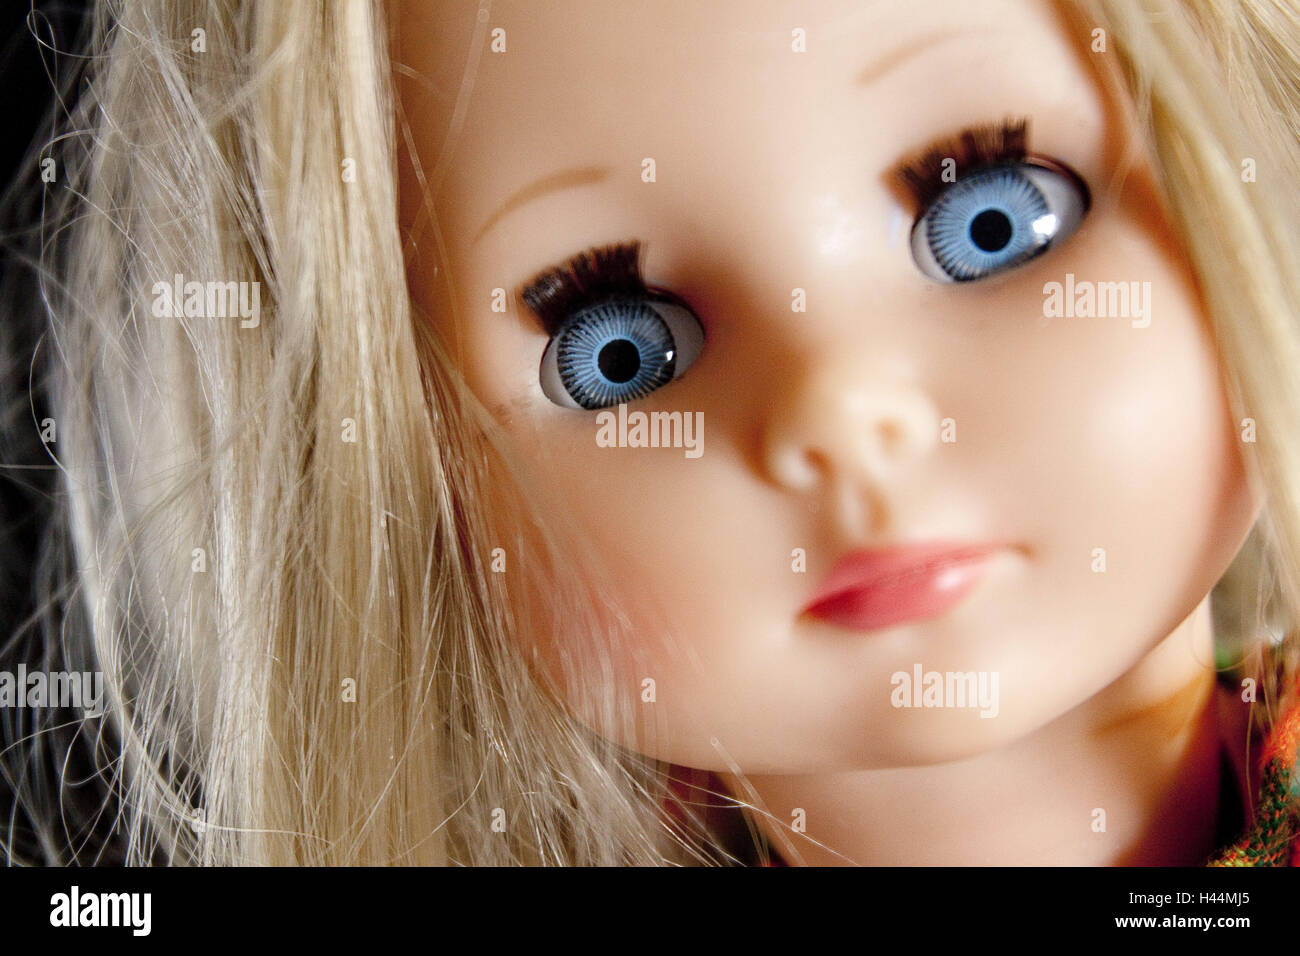 Doll, portrait, curled, doll look, look, toys, icon, childhood, eyes, blue, hairs, blond, Stock Photo